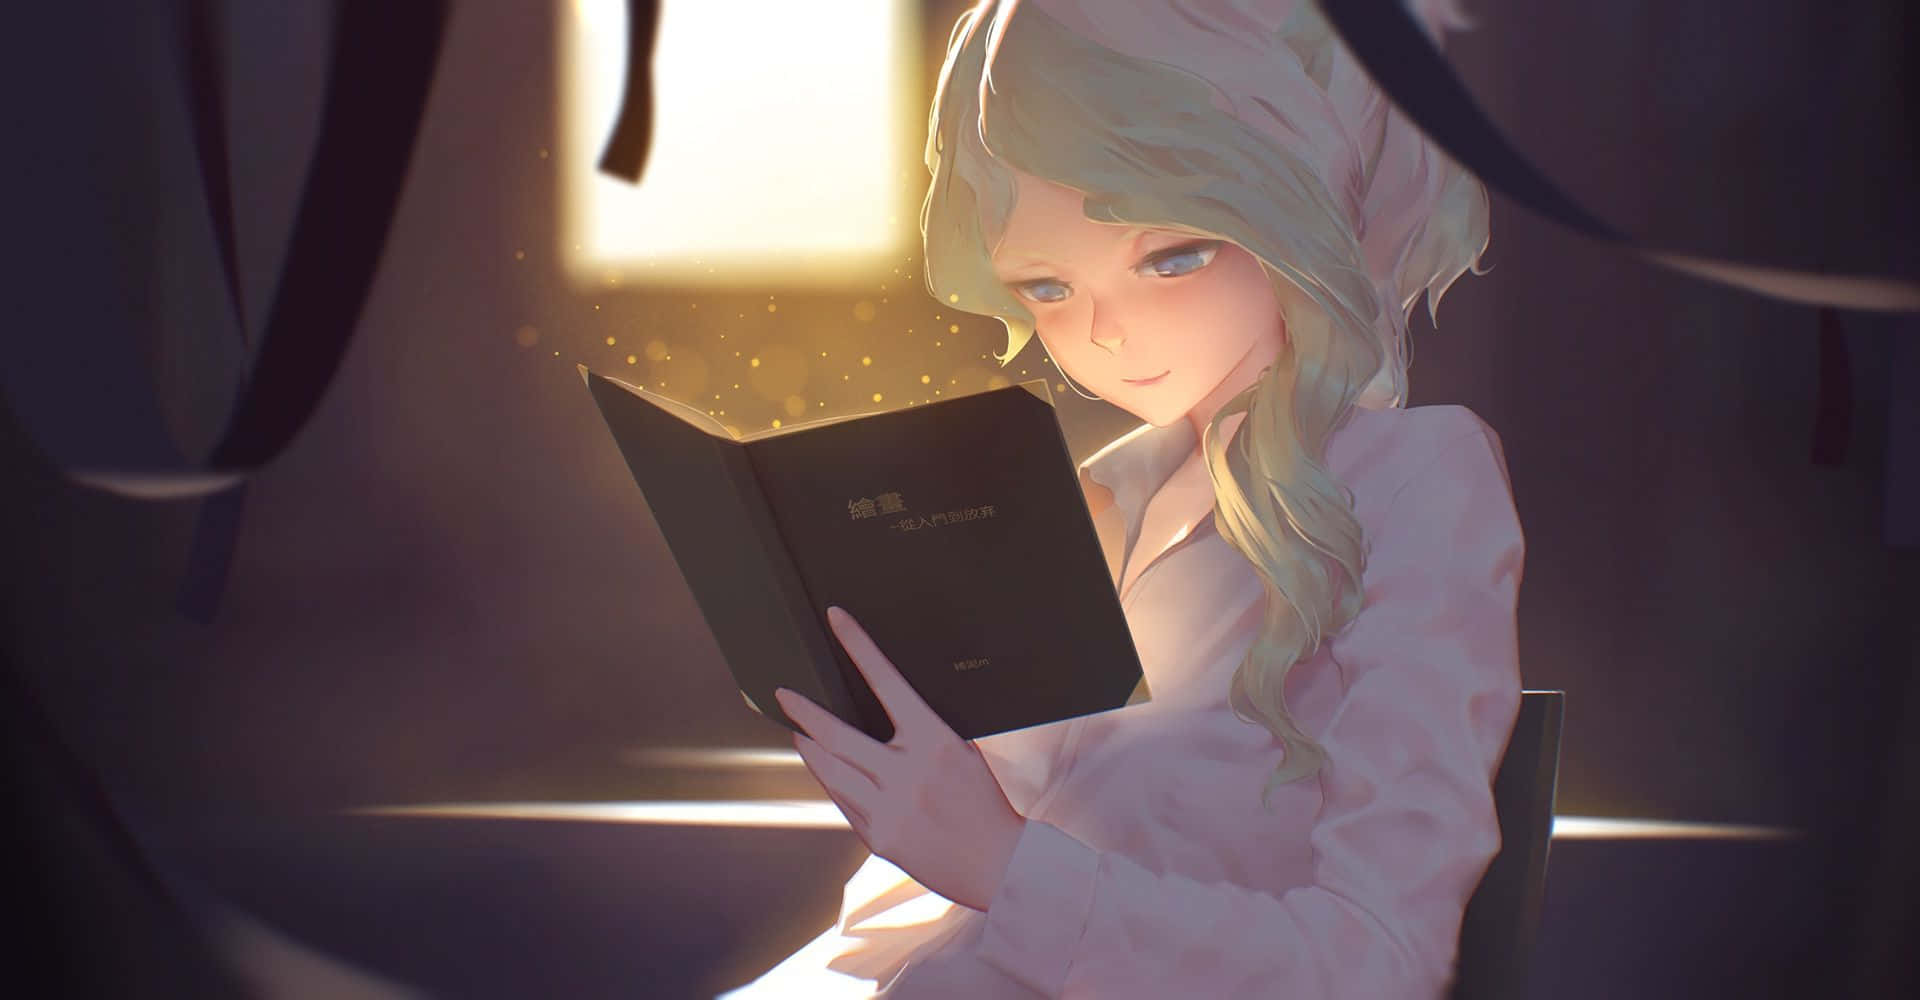 A Girl Is Reading A Book In A Dark Room